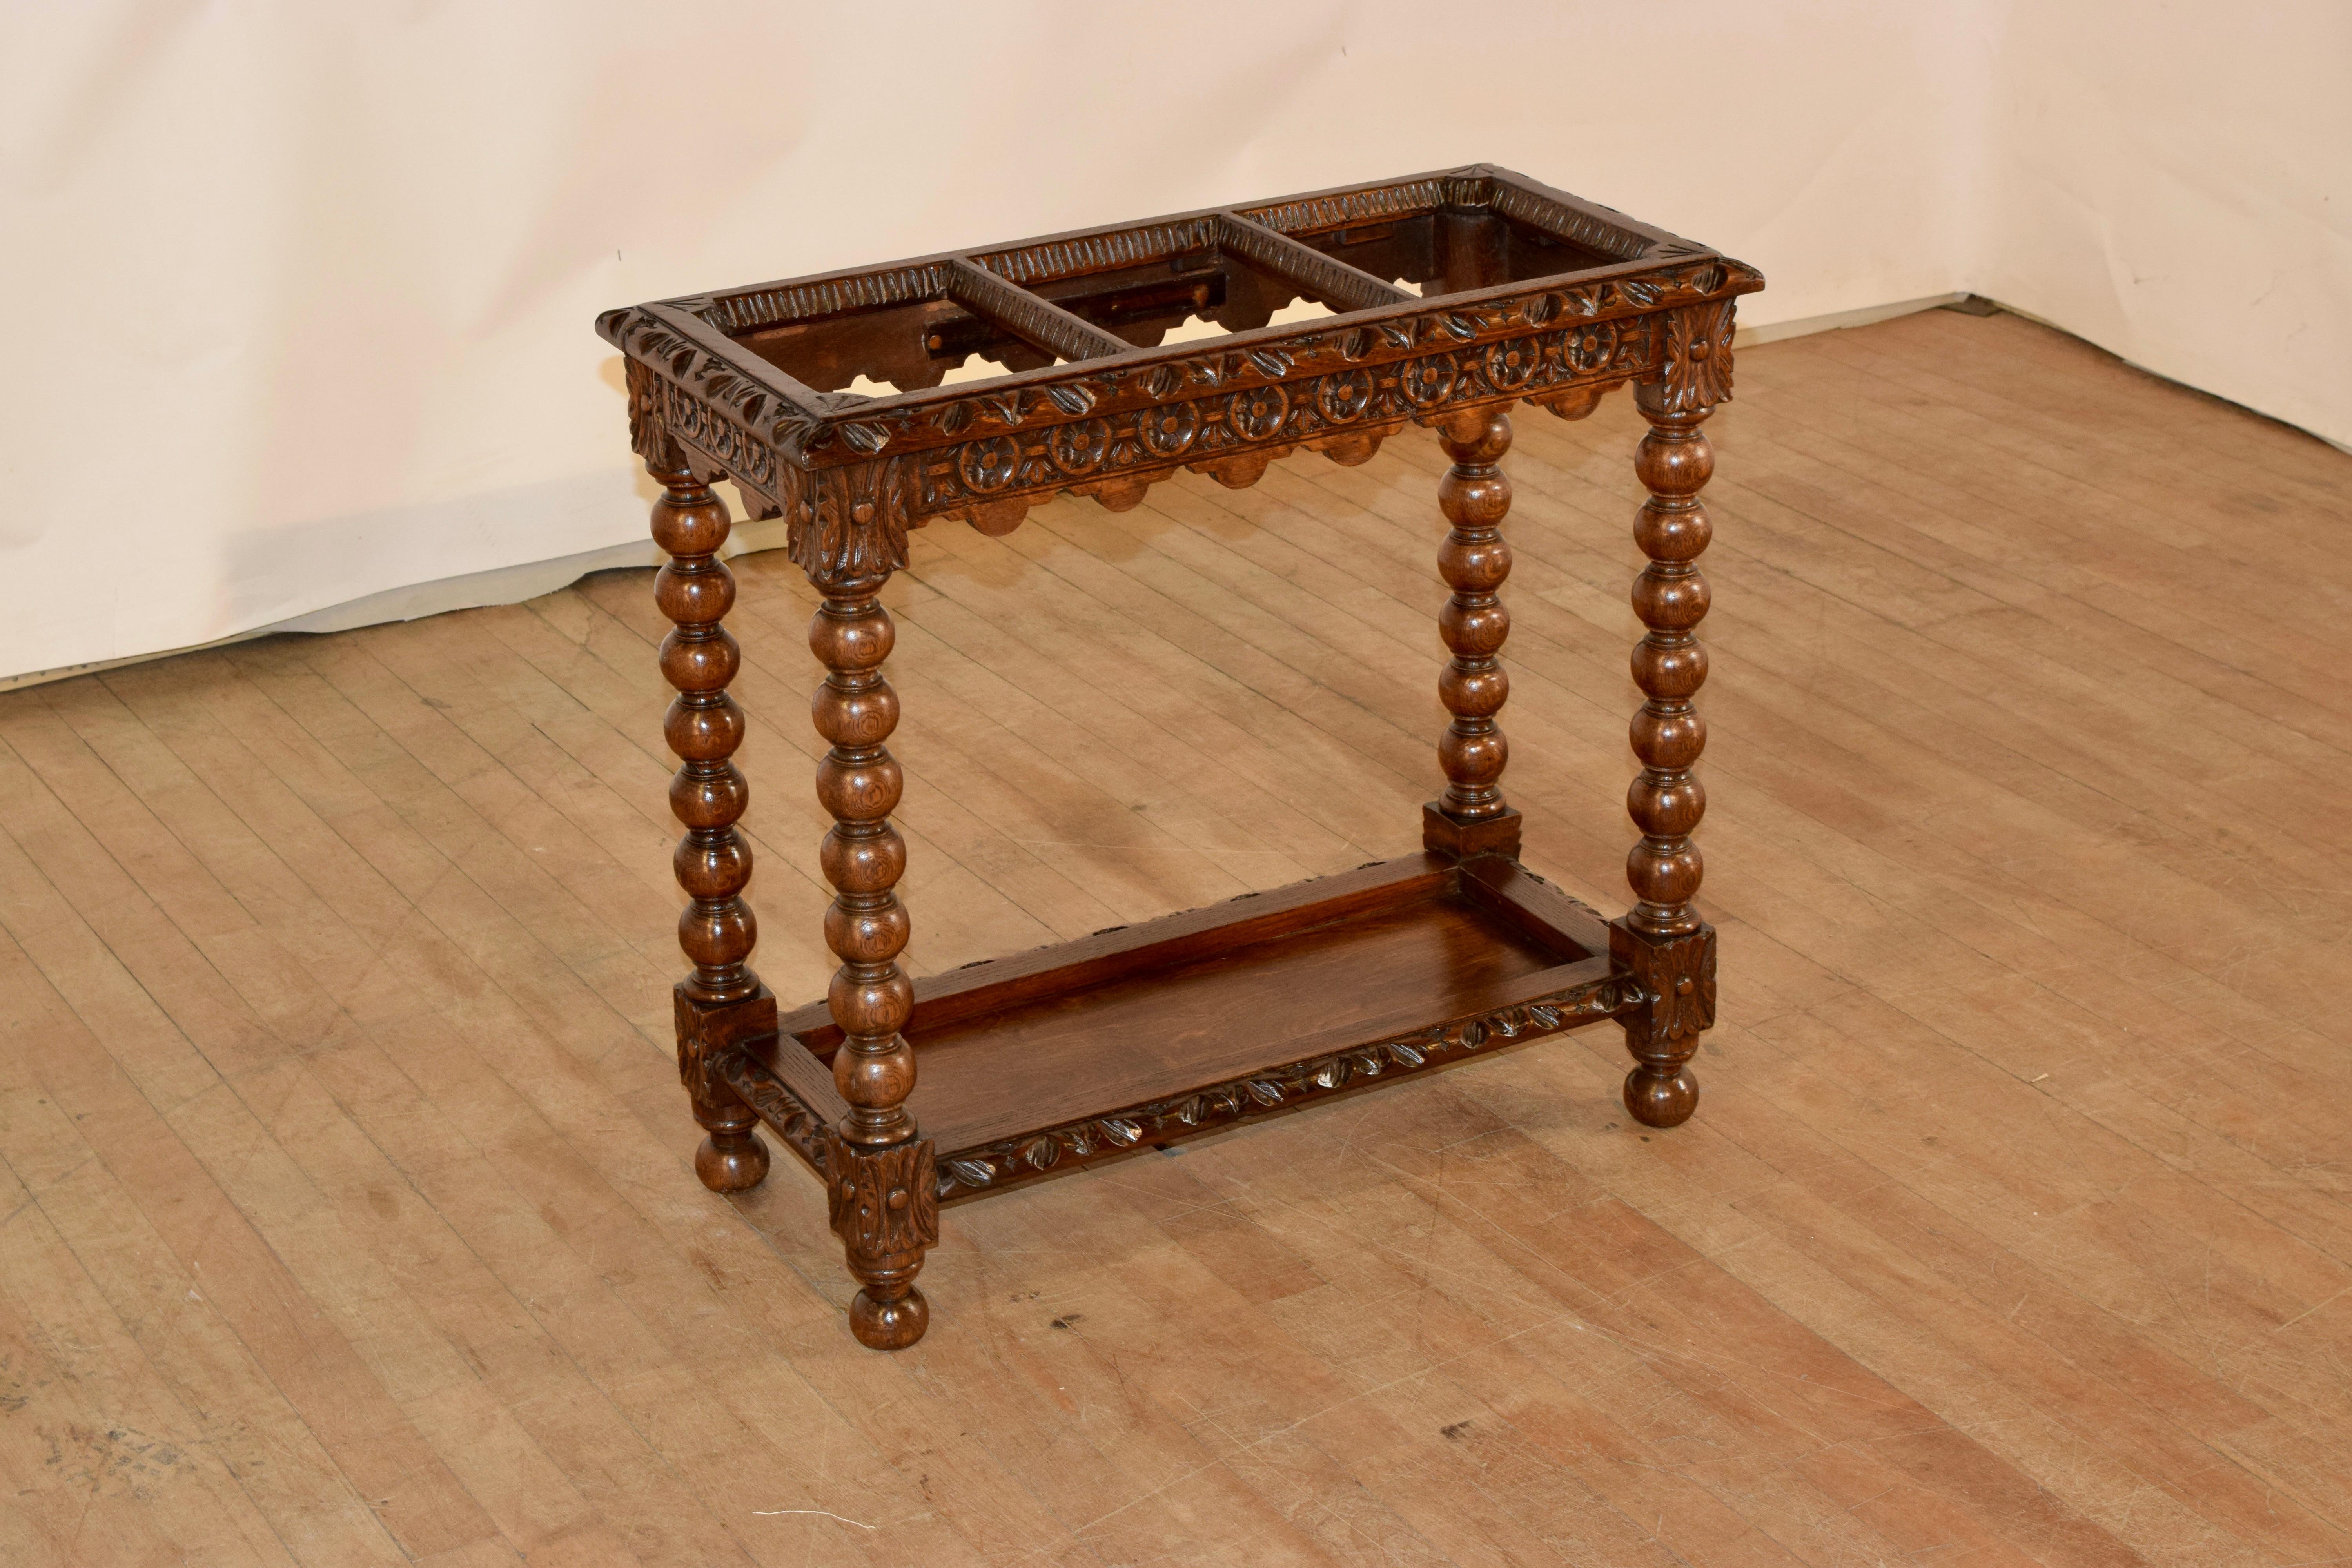 Extraordinary 19th century stick stand from England made from oak. The top has beveled and hand carved decoration around the edges, and has three separated sections for storing walking sticks or umbrellas. the apron is also exquisitely hand carved